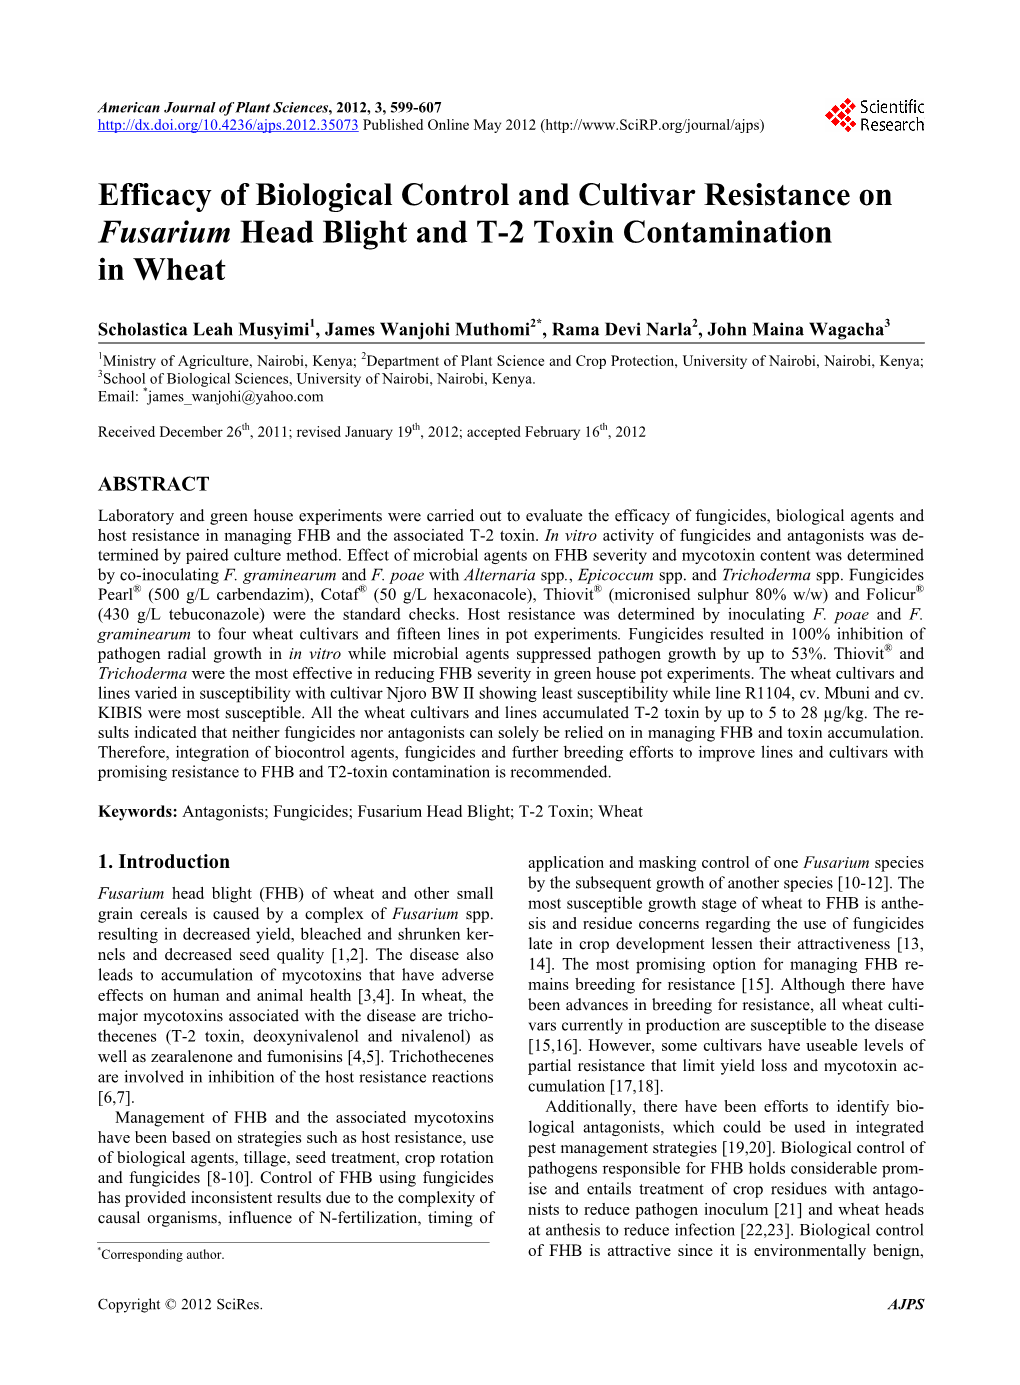 Efficacy of Biological Control and Cultivar Resistance on Fusarium Head Blight and T-2 Toxin Contamination in Wheat